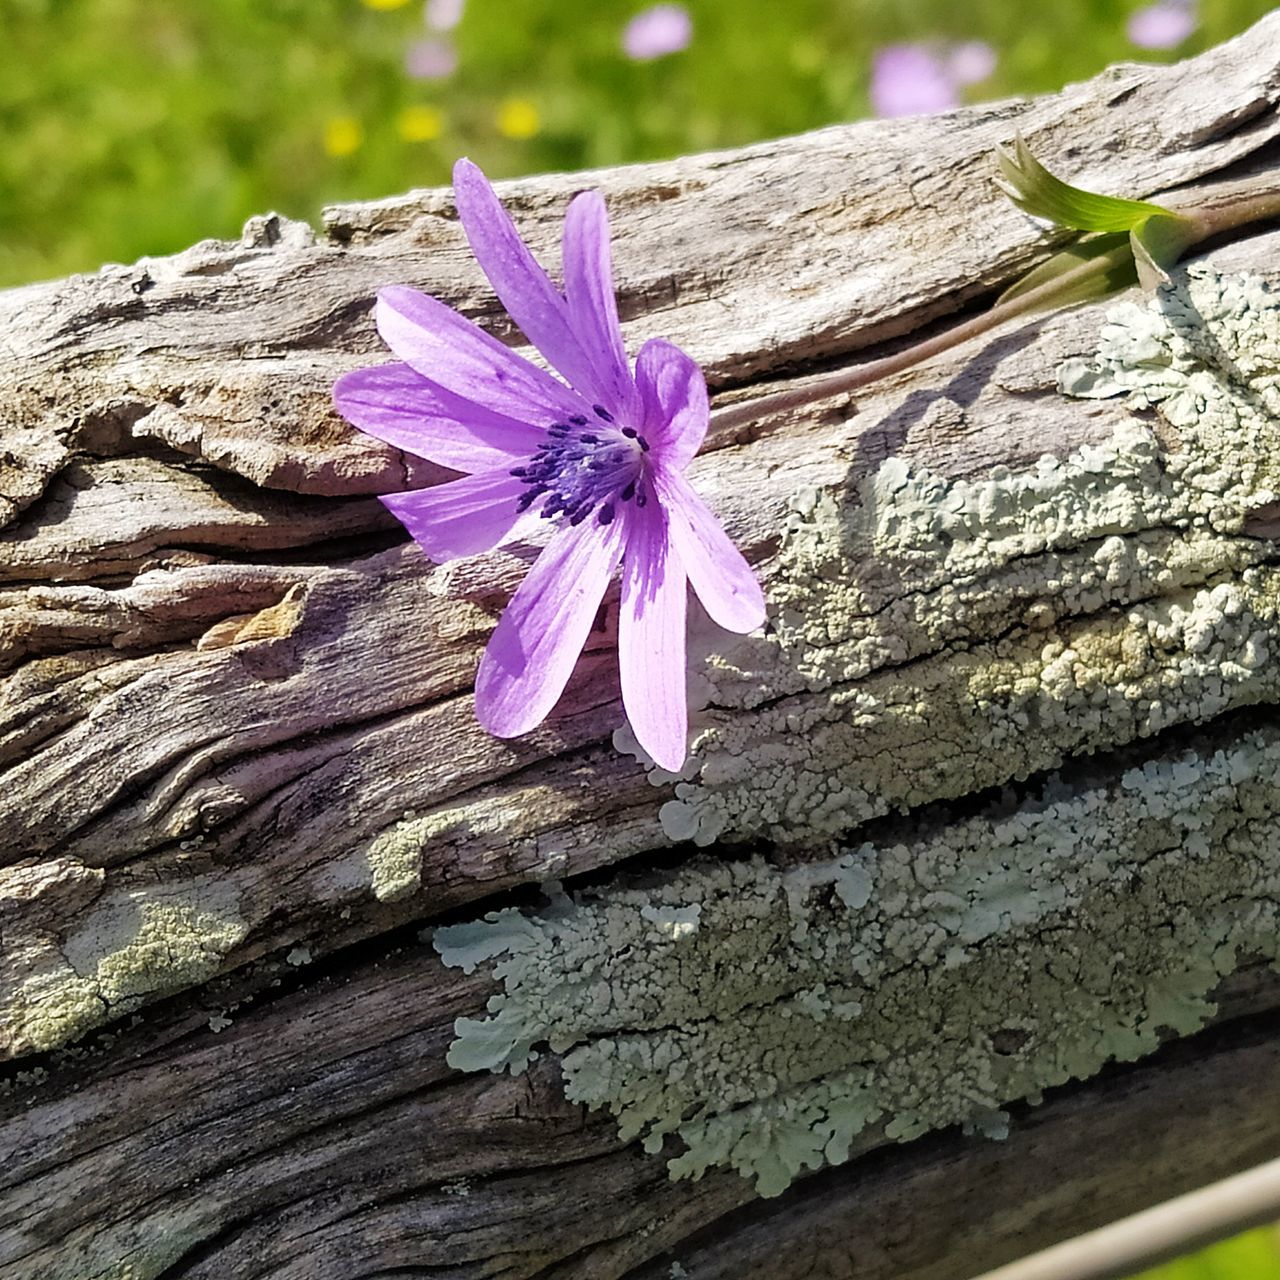 CLOSE-UP OF PINK FLOWER ON WOOD AGAINST TREE